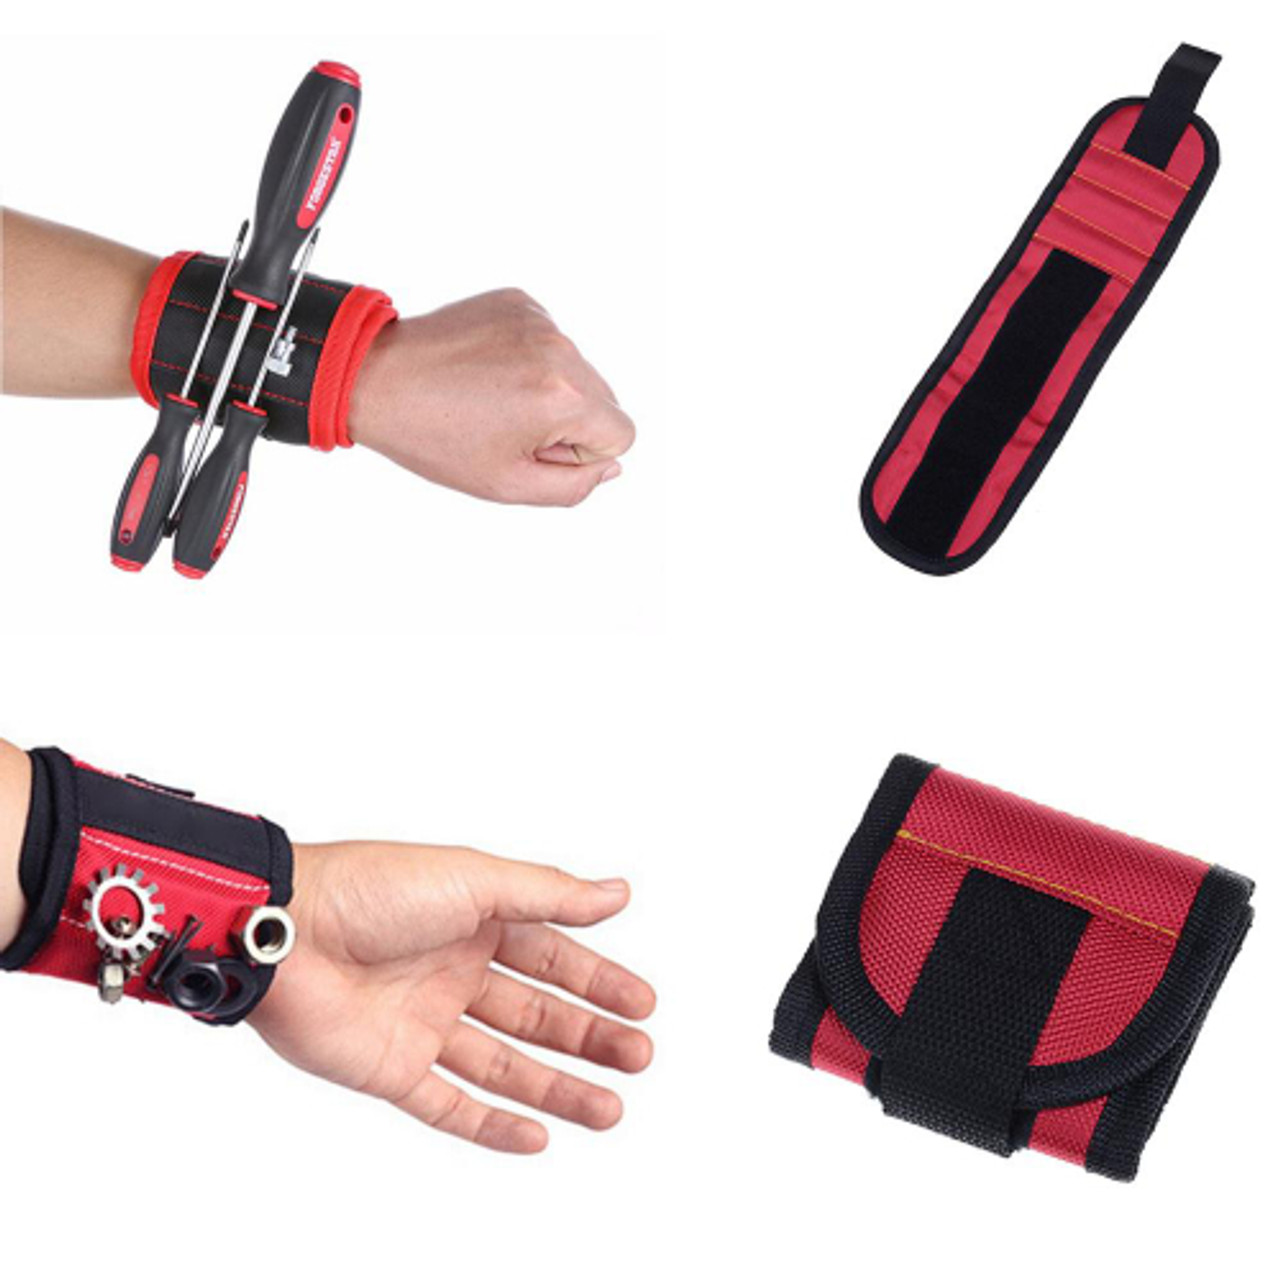 Magnetic Wristband For Holding Tools, Screws, Nails & Bolts Magnetic Wrist  Bracelet